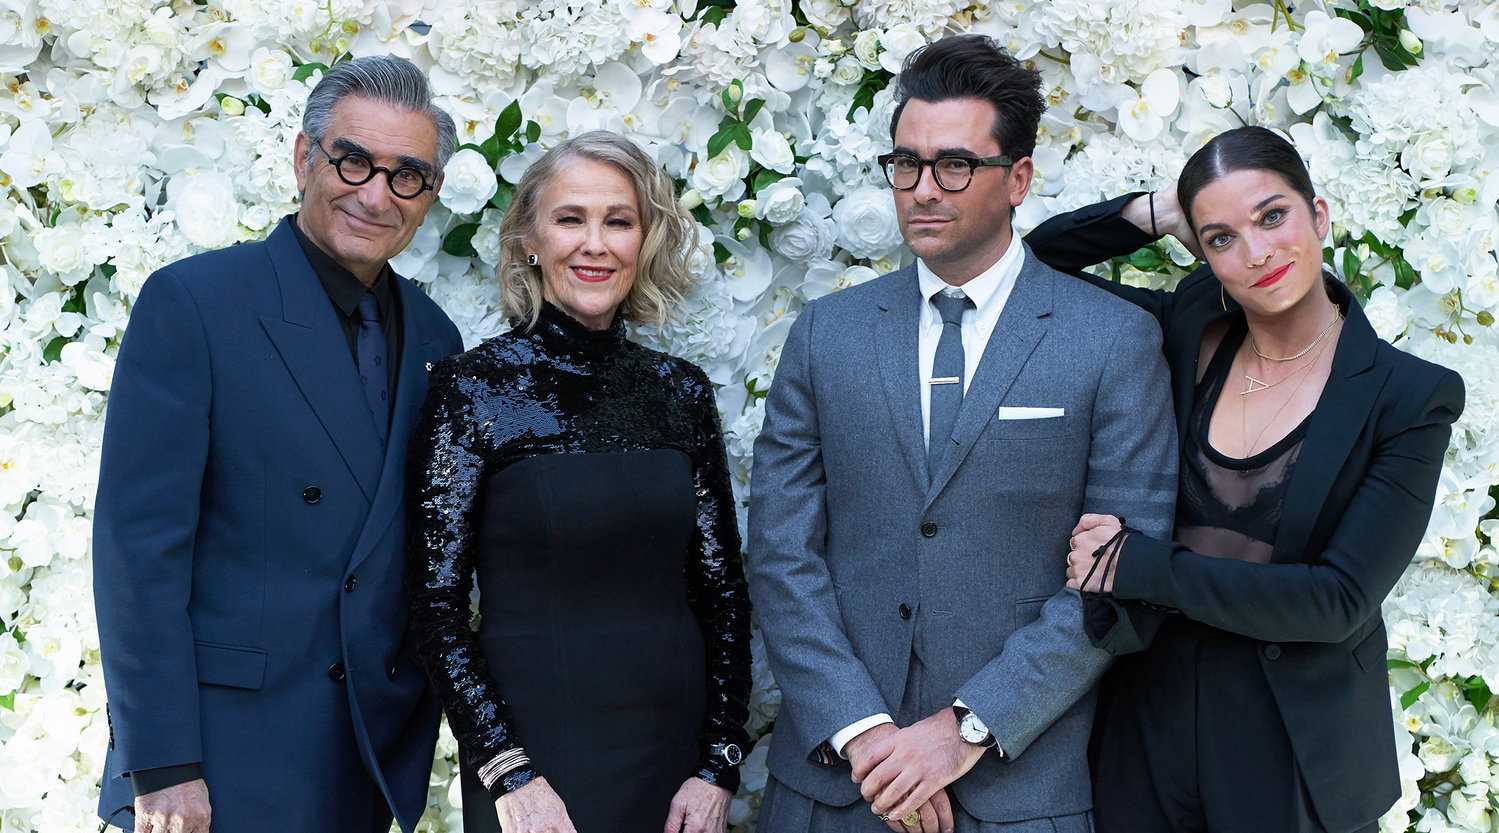 The "Schitt's Creek" cast at a pre-Emmys party, Sept. 21, 2020. From left: Eugene Levy, Catherine O'Hara, Dan Levy and Anne Murphy.